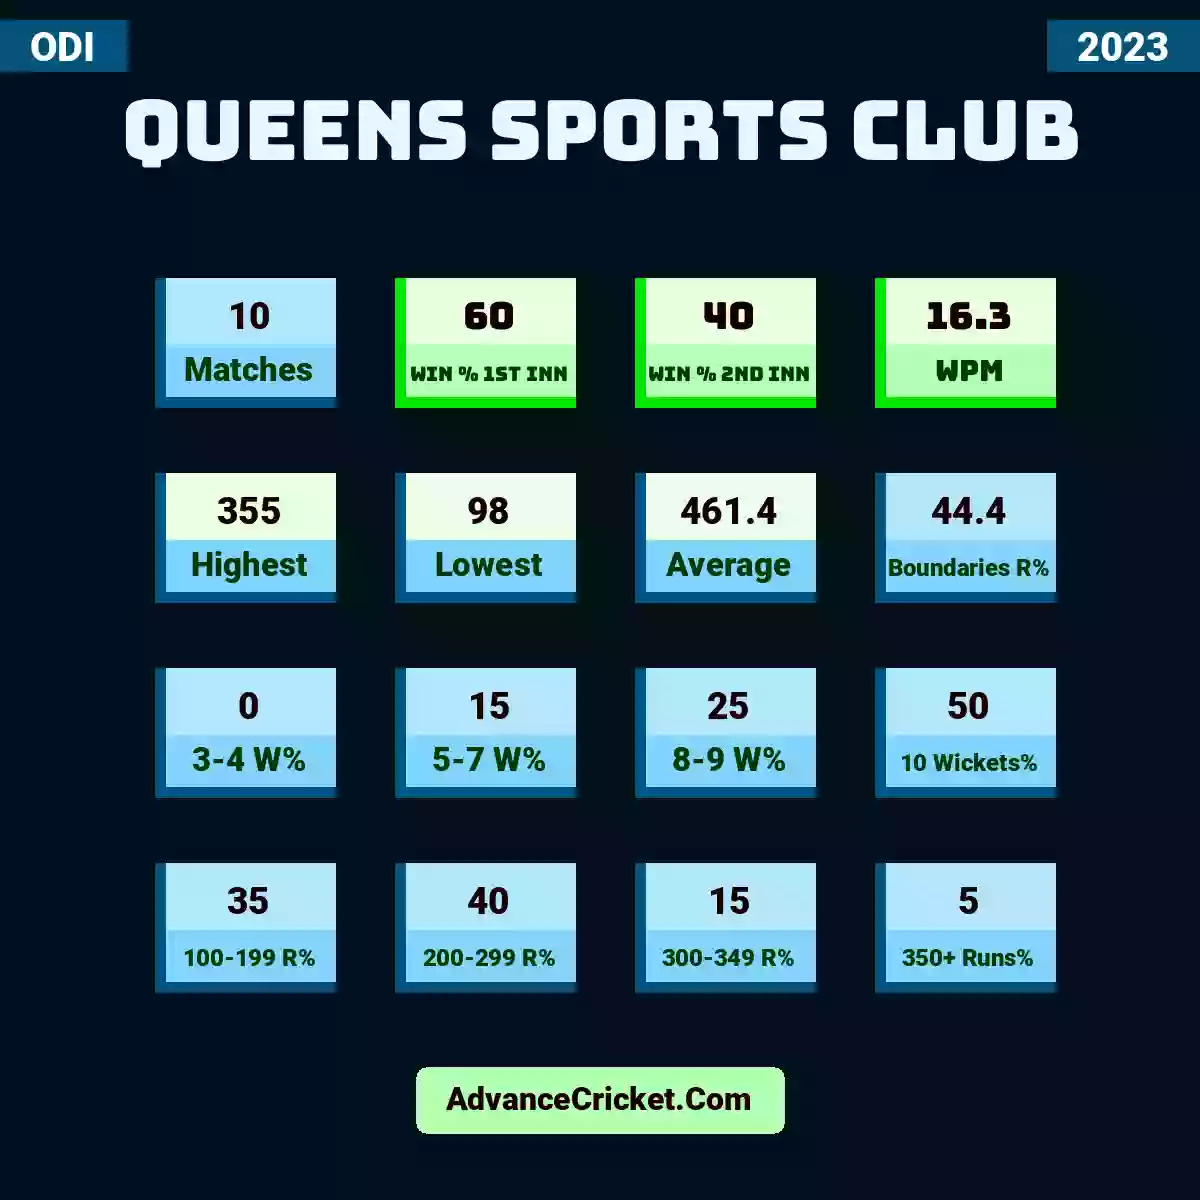 Image showing Queens Sports Club with Matches: 10, Win % 1st Inn: 60, Win % 2nd Inn: 40, WPM: 16.3, Highest: 355, Lowest: 98, Average: 461.4, Boundaries R%: 44.4, 3-4 W%: 0, 5-7 W%: 15, 8-9 W%: 25, 10 Wickets%: 50, 100-199 R%: 35, 200-299 R%: 40, 300-349 R%: 15, 350+ Runs%: 5.